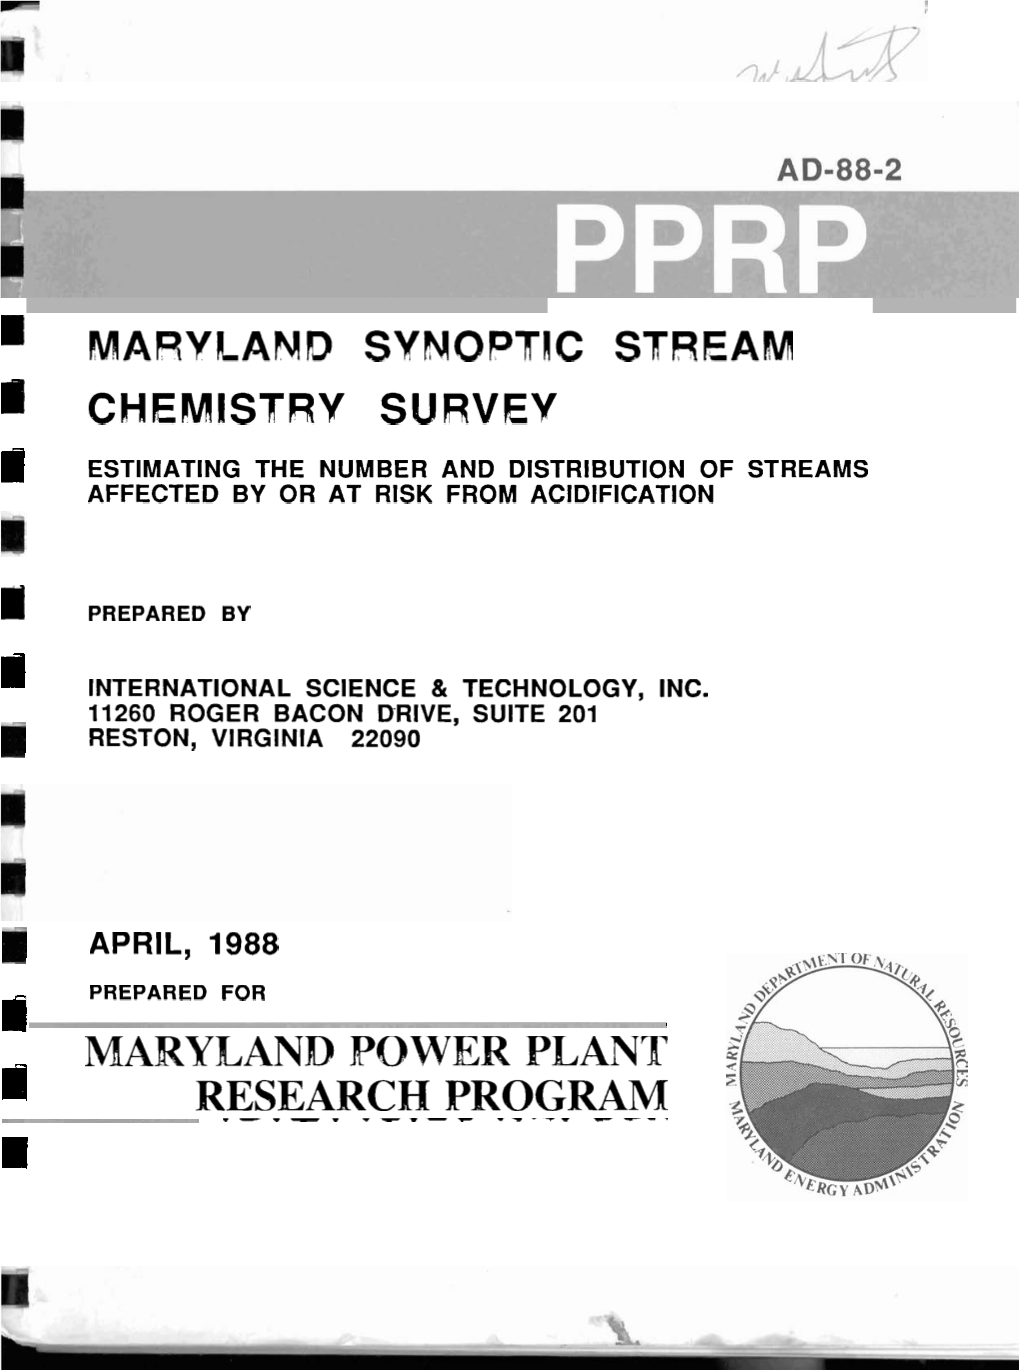 The 1988 Maryland Synopic Stream Chemistry Survey Report On